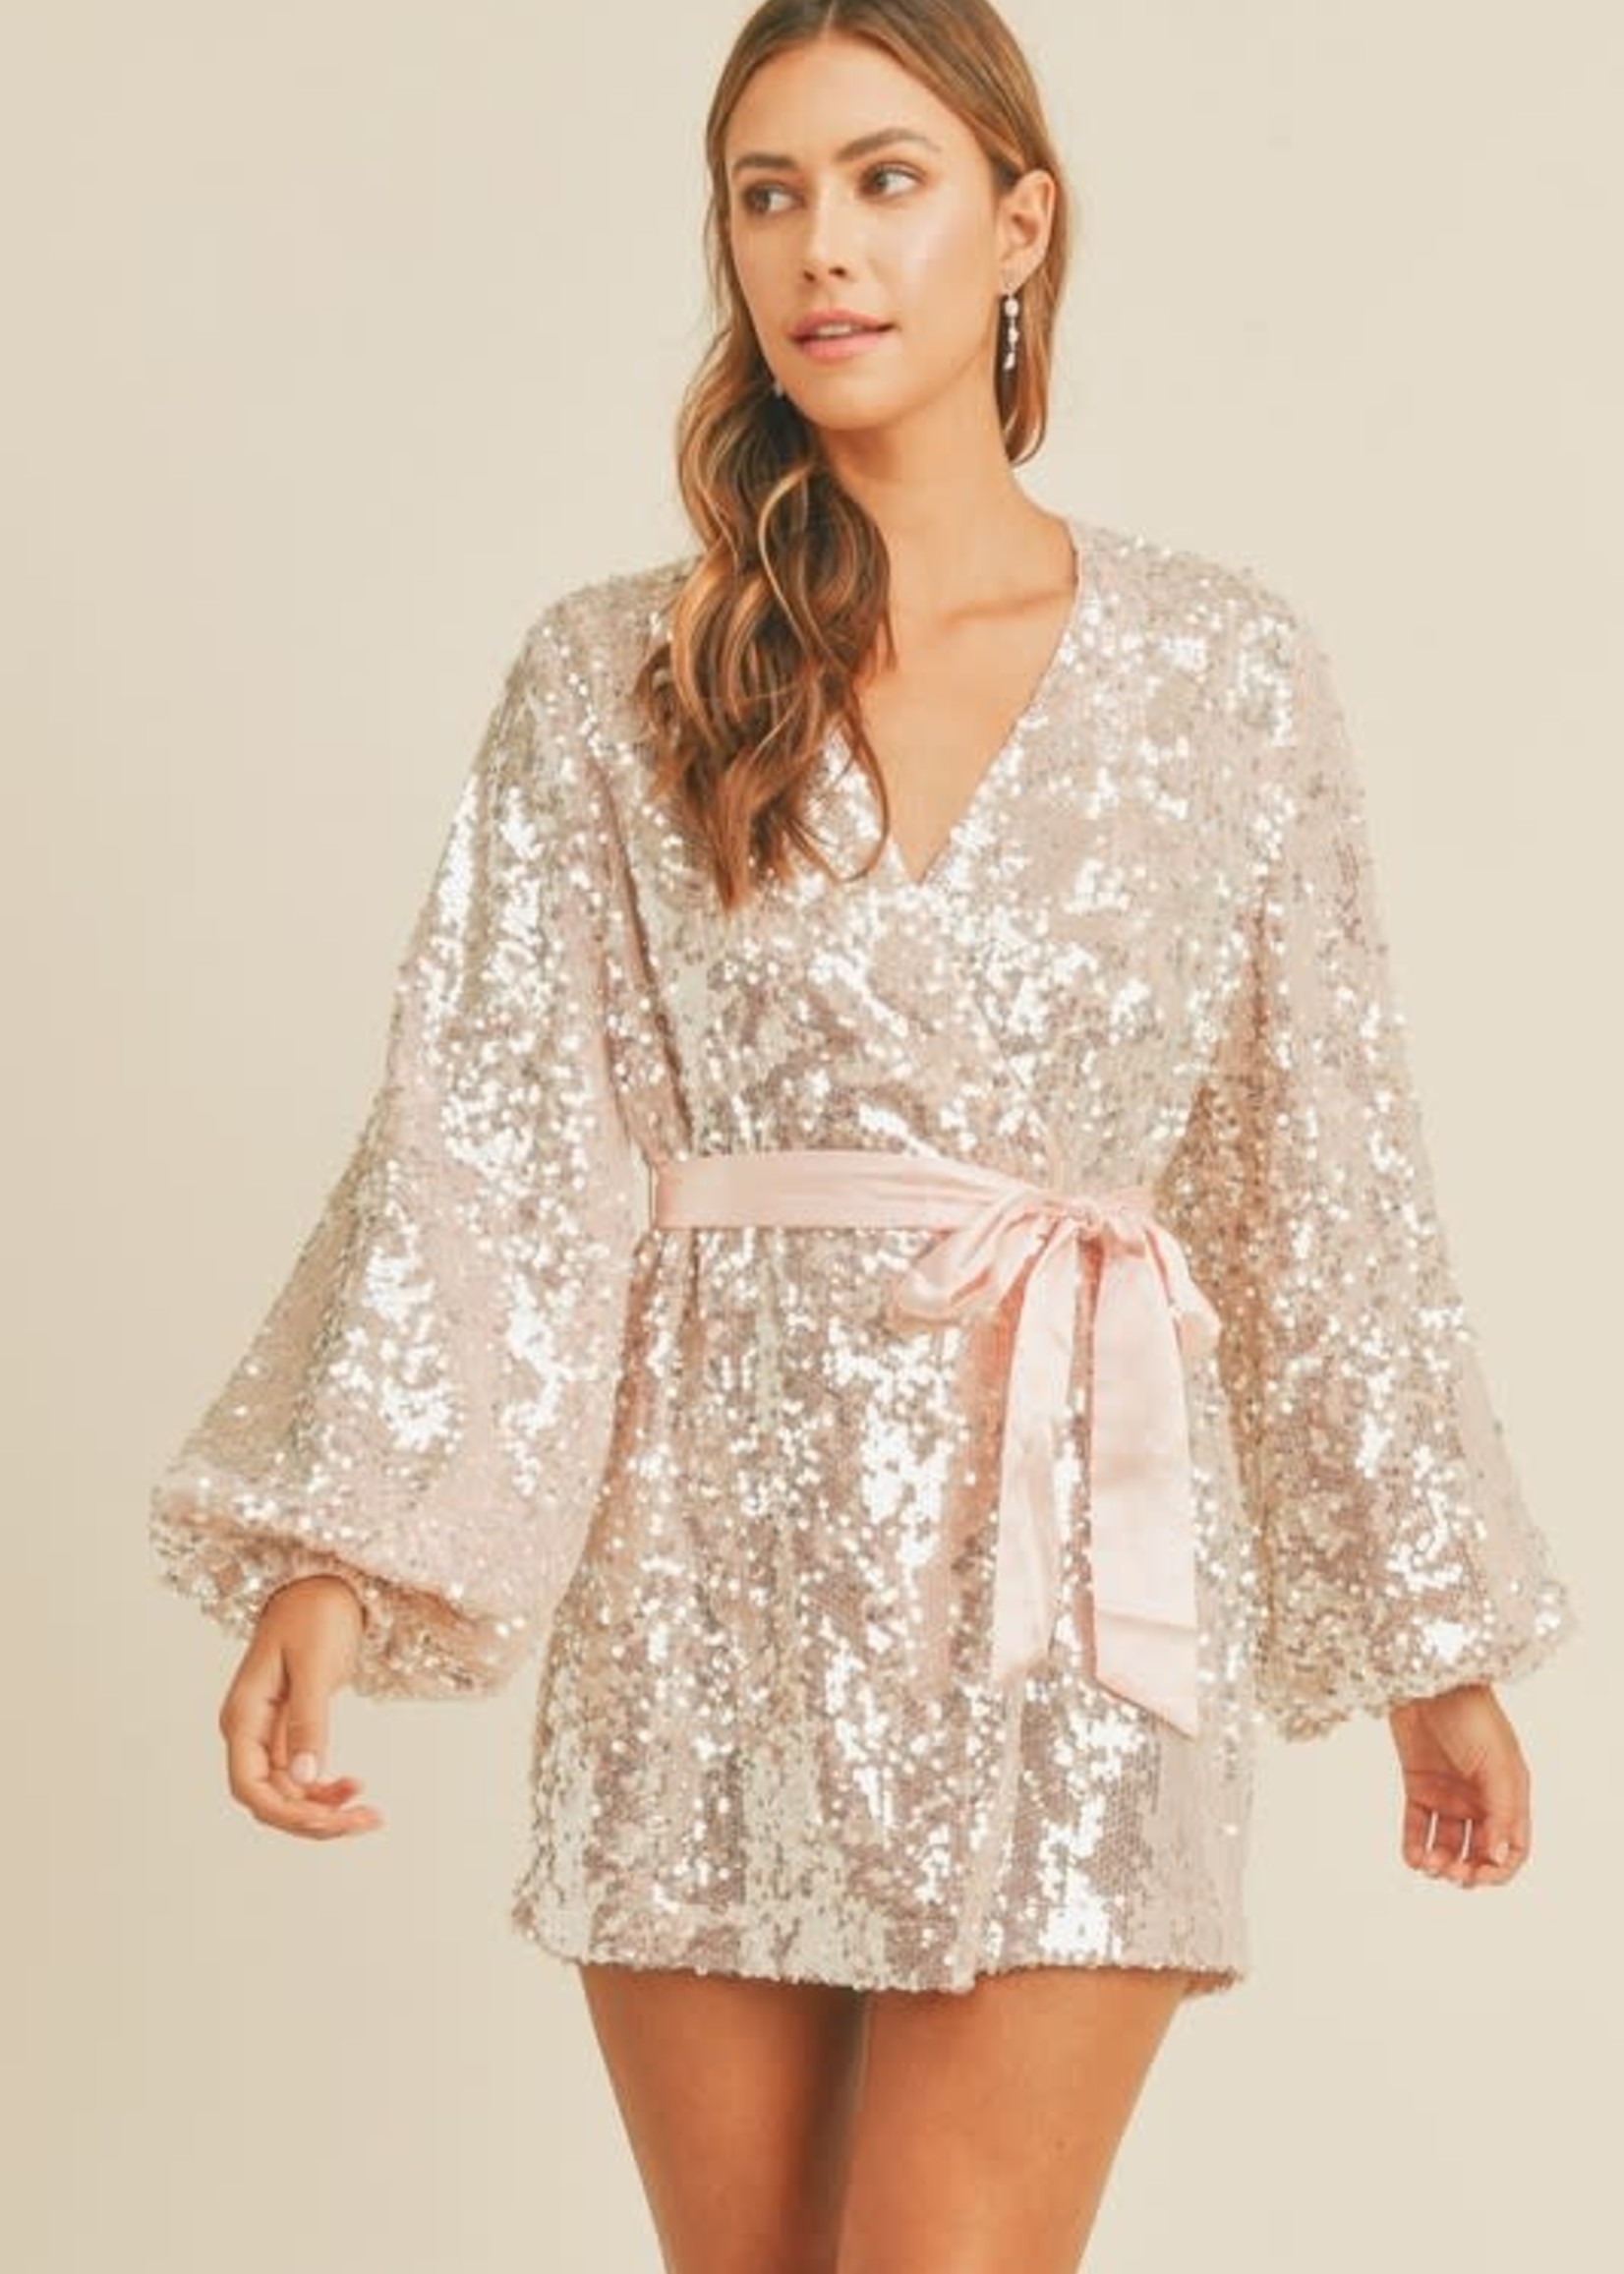 Wrap Up In Sparkly Sequin Party Dress (2 Colors)